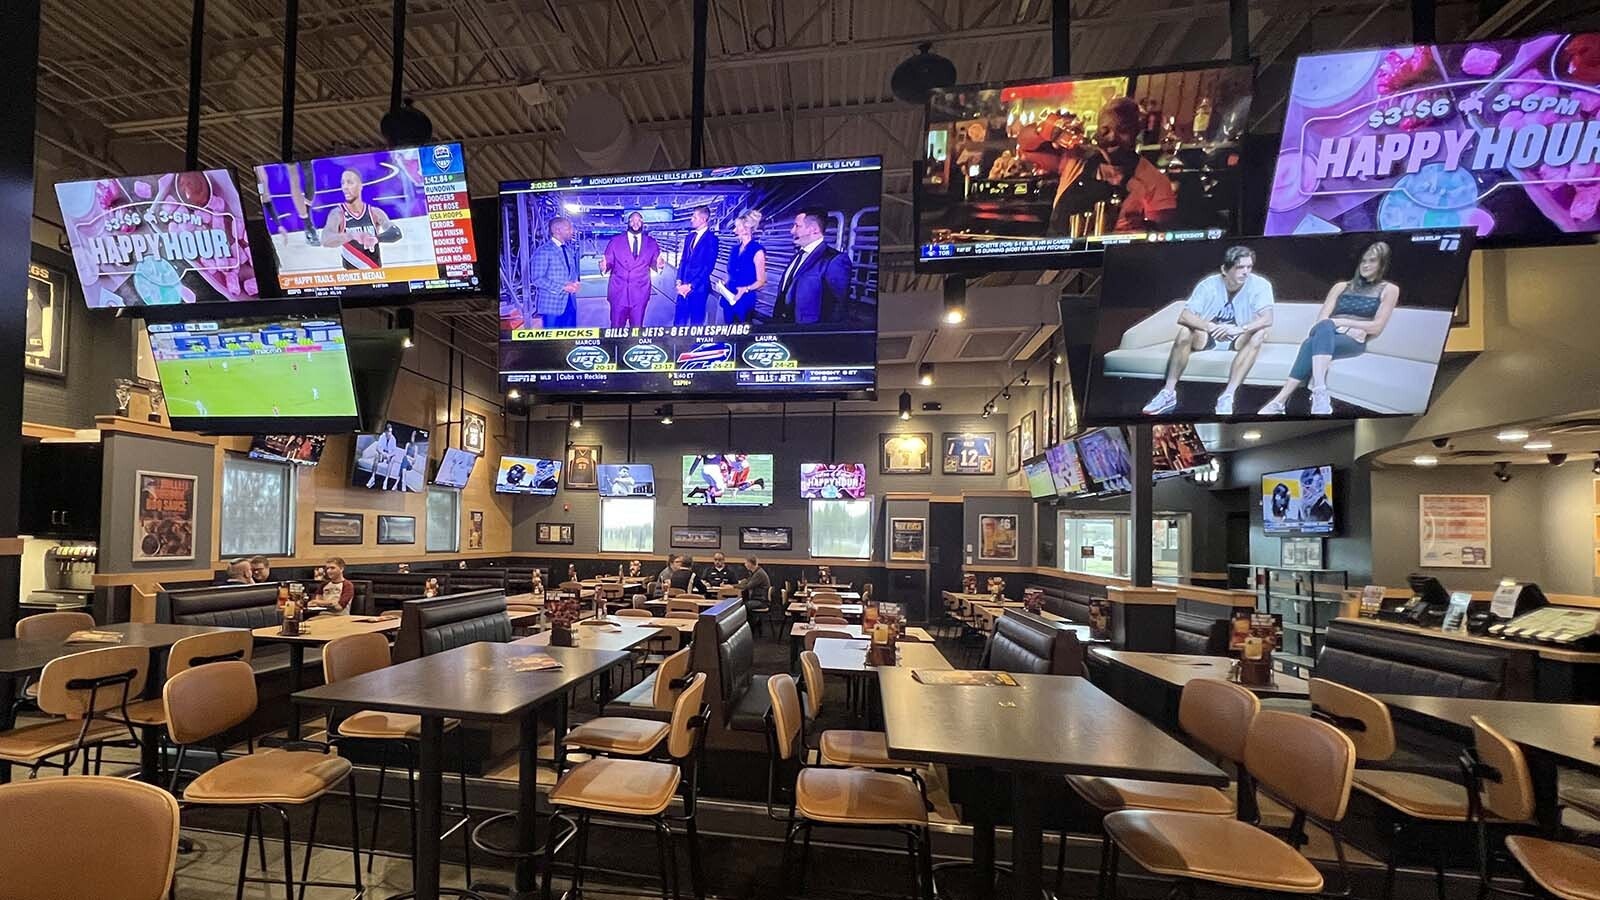 Many of the dozens of big screens in the Cheyenne Buffalo Wild Wings restaurant were tuned to ESPN networks Monday afternoon leading up to Monday Night Football. The channels are available to Wyoming Charter-Spectrum customers again after Disney and Charter reached a deal earlier in the day.